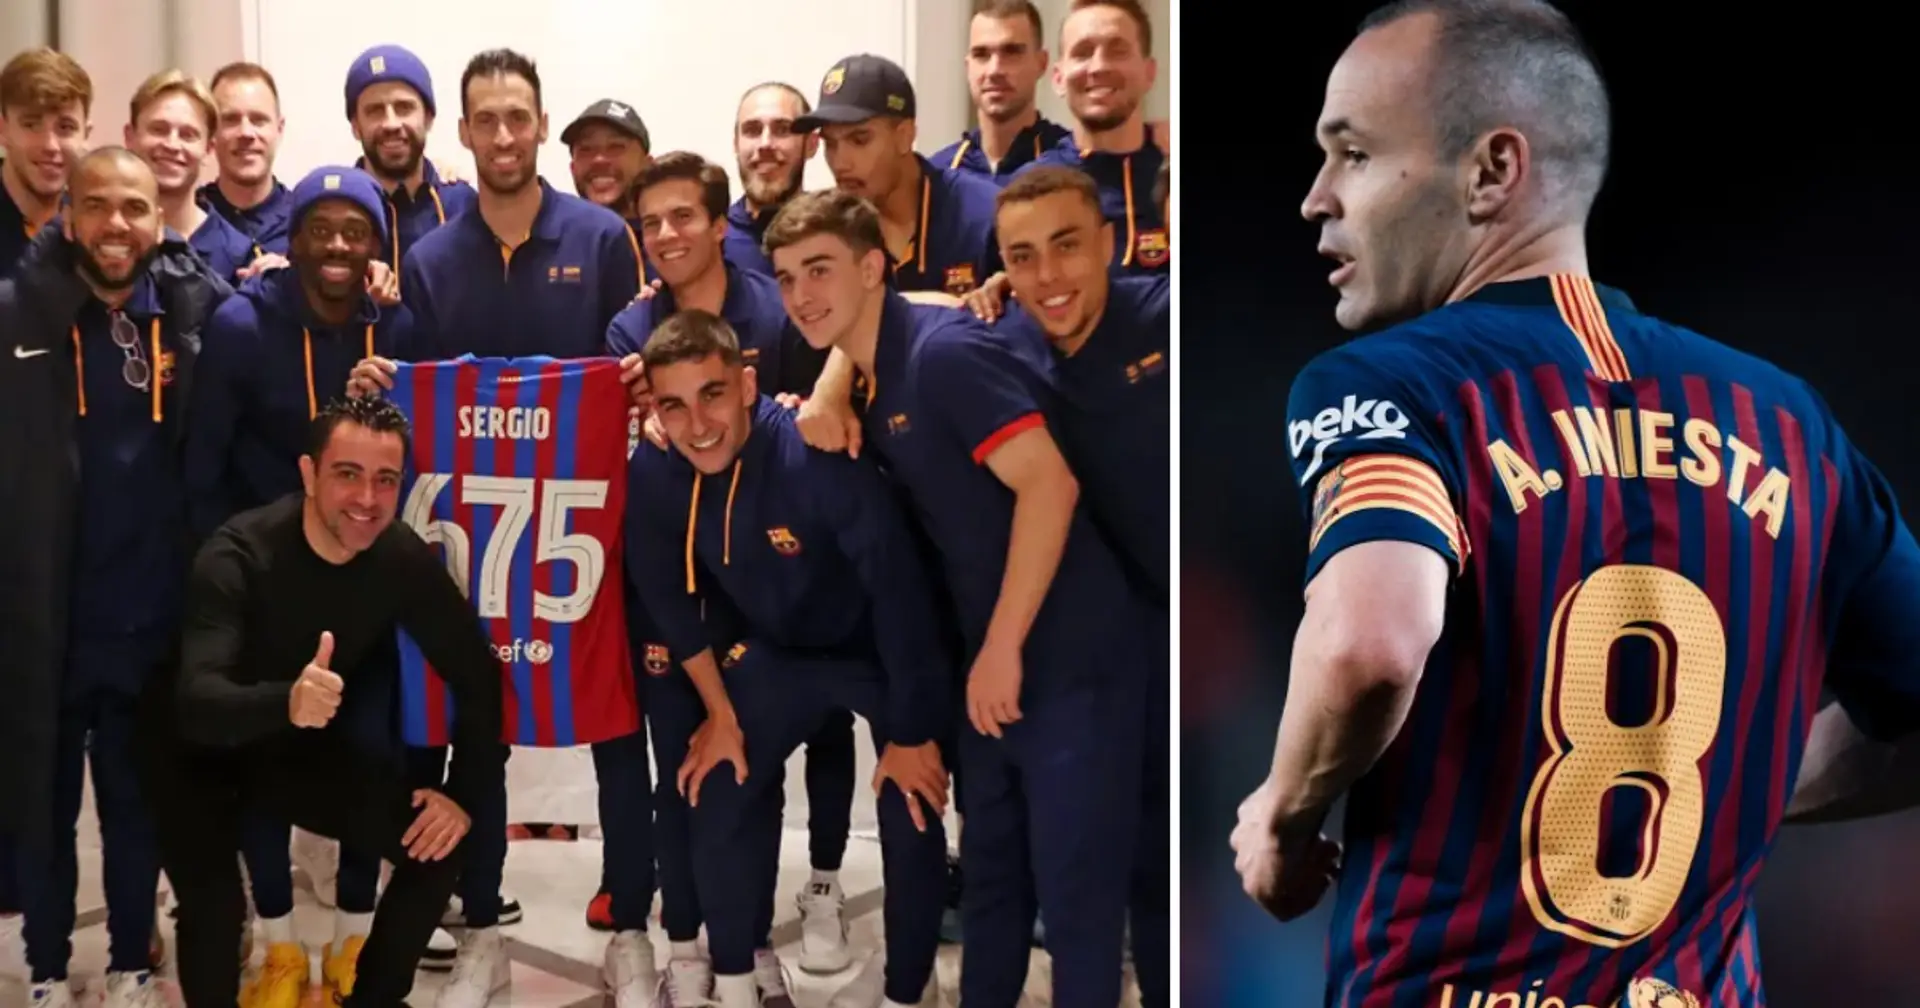 Busquets overtakes Iniesta, close to matching Messi: Barca's top 5 record appearances 